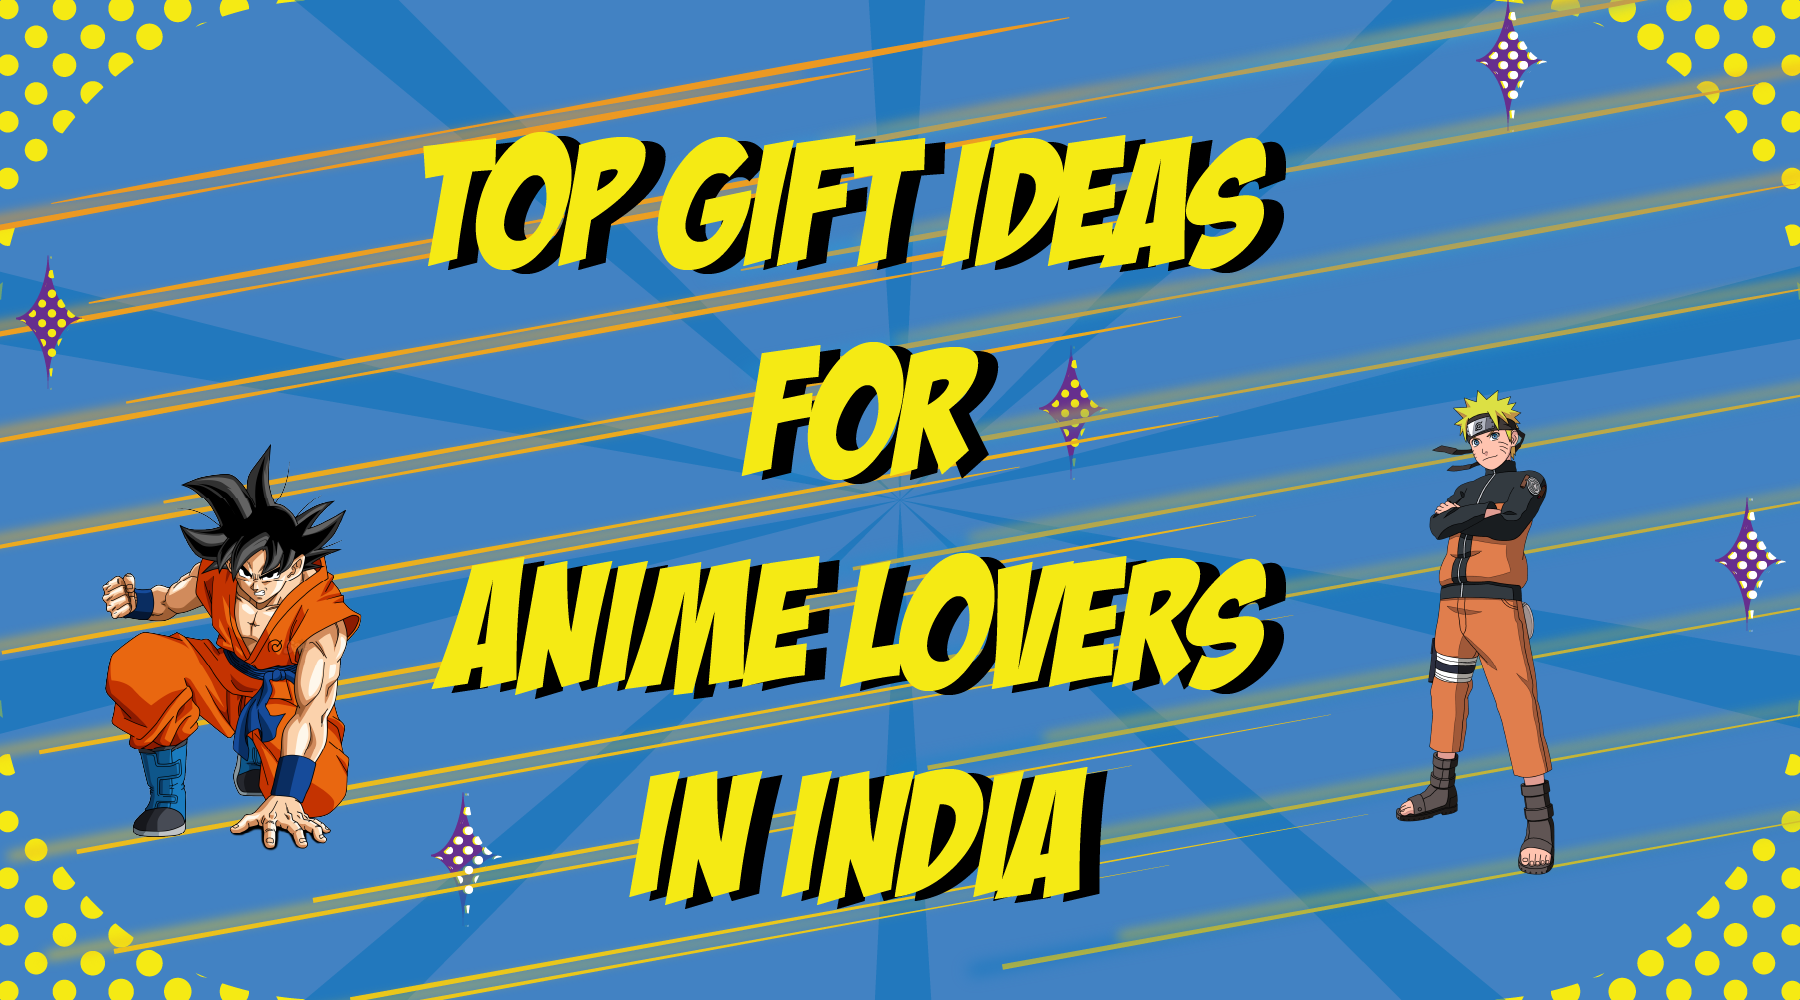 Gifts under 2000 - Unique Gifts Under Rs 2000 Online in India